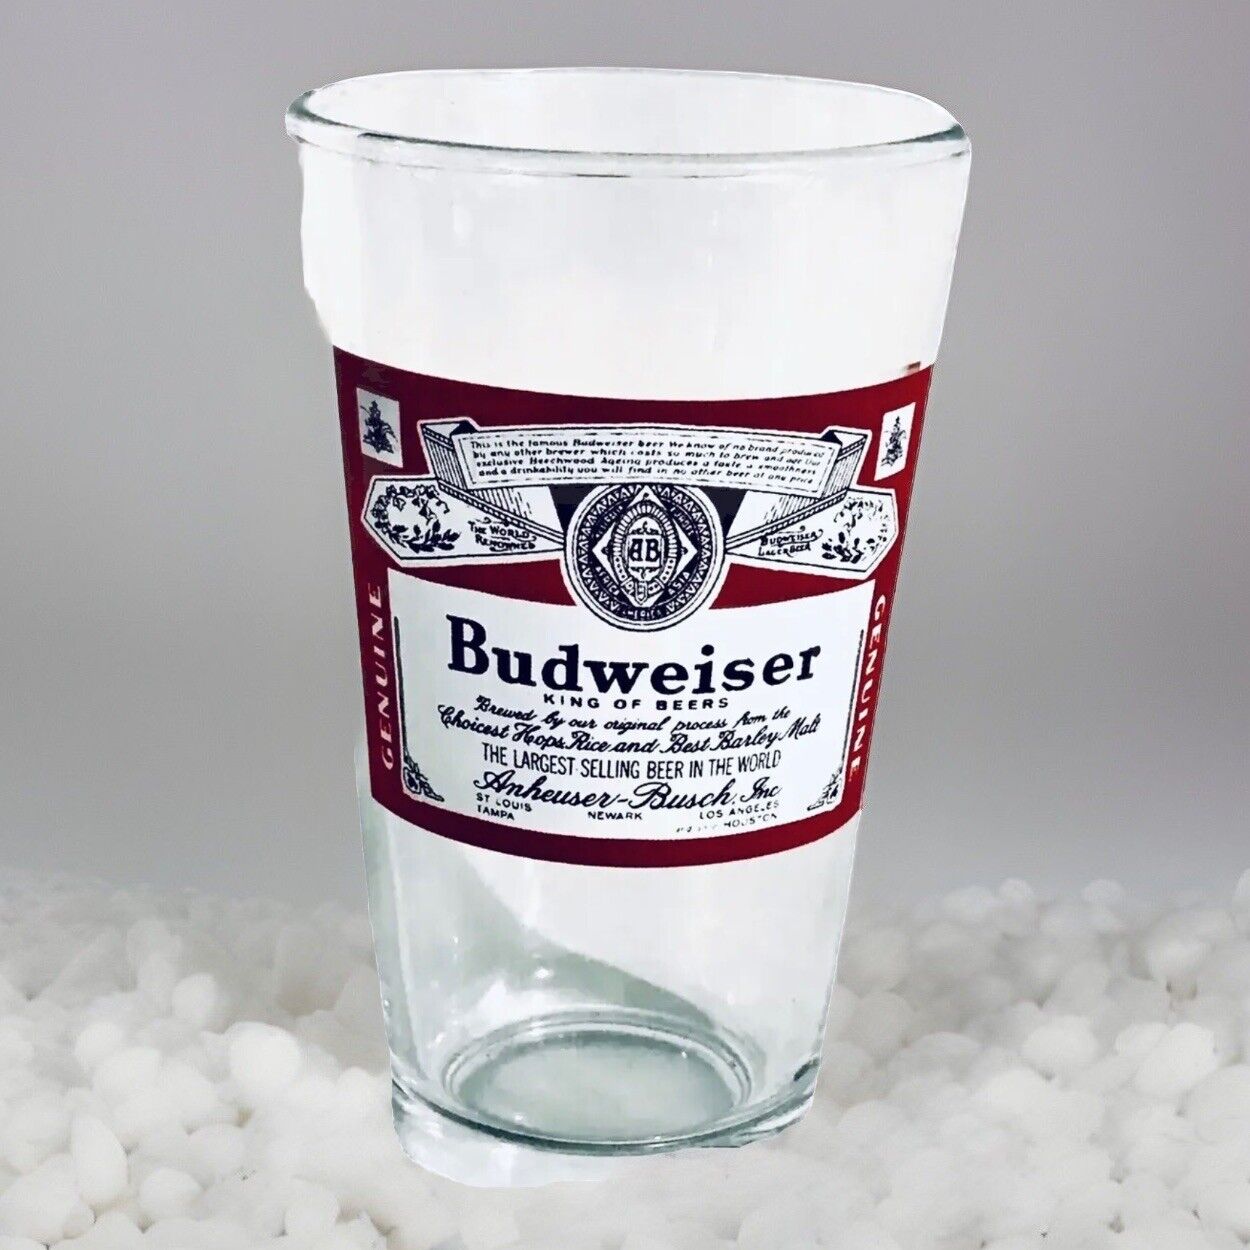 VTG Rare Budweiser Pint King of Beers 16oz Glass MAN CAVE / SHE SHED Old Label